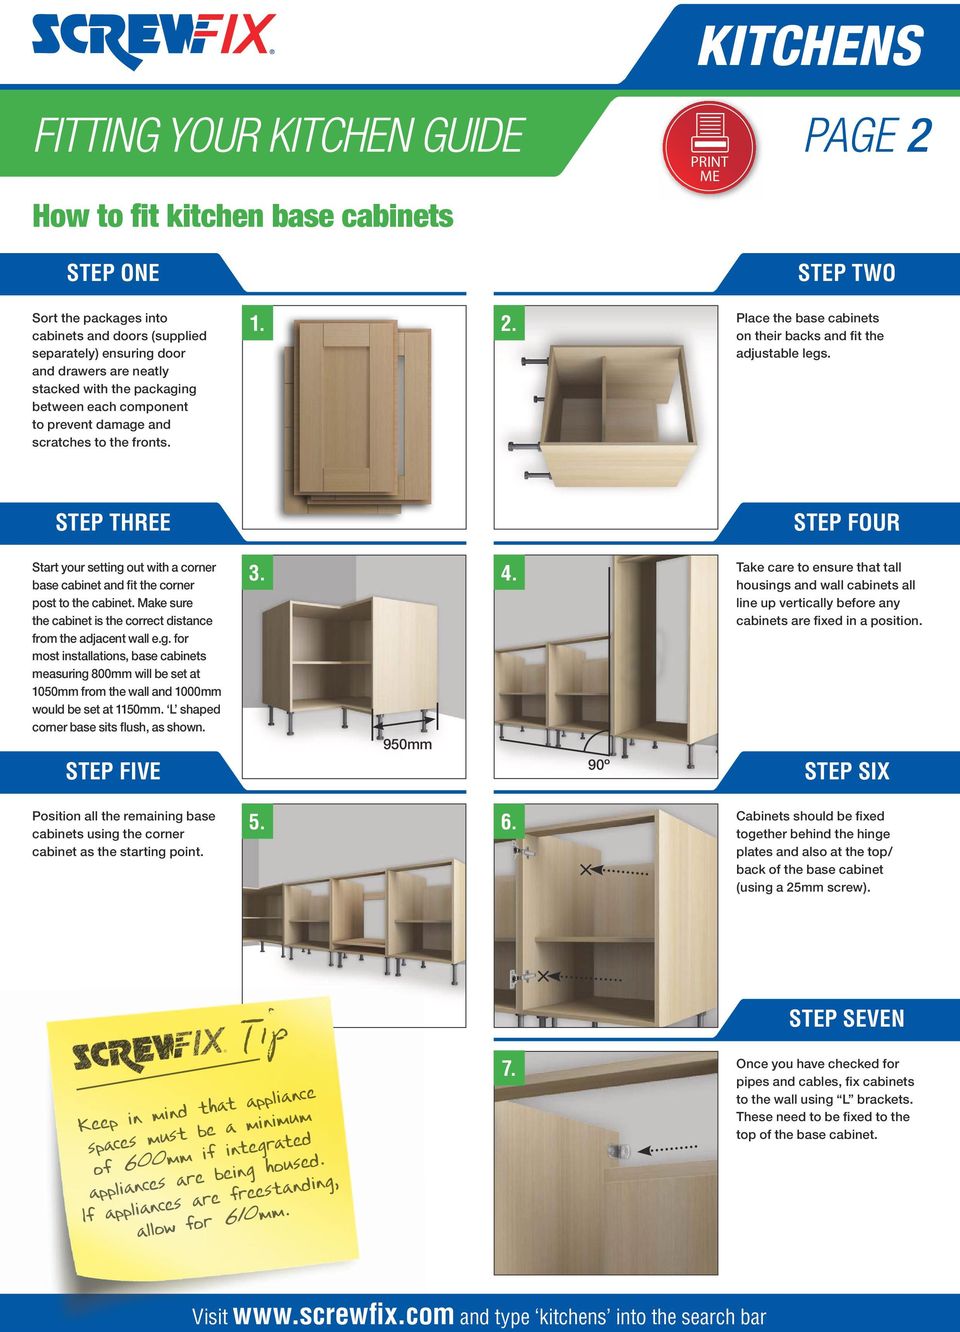 Start your setting out with a corner base cabinet and fit the corner post to the cabinet. Make sure the cabinet is the correct distance from the adjacent wall e.g. for most installations, base cabinets measuring 800mm will be set at 1050mm from the wall and 1000mm would be set at 1150mm.